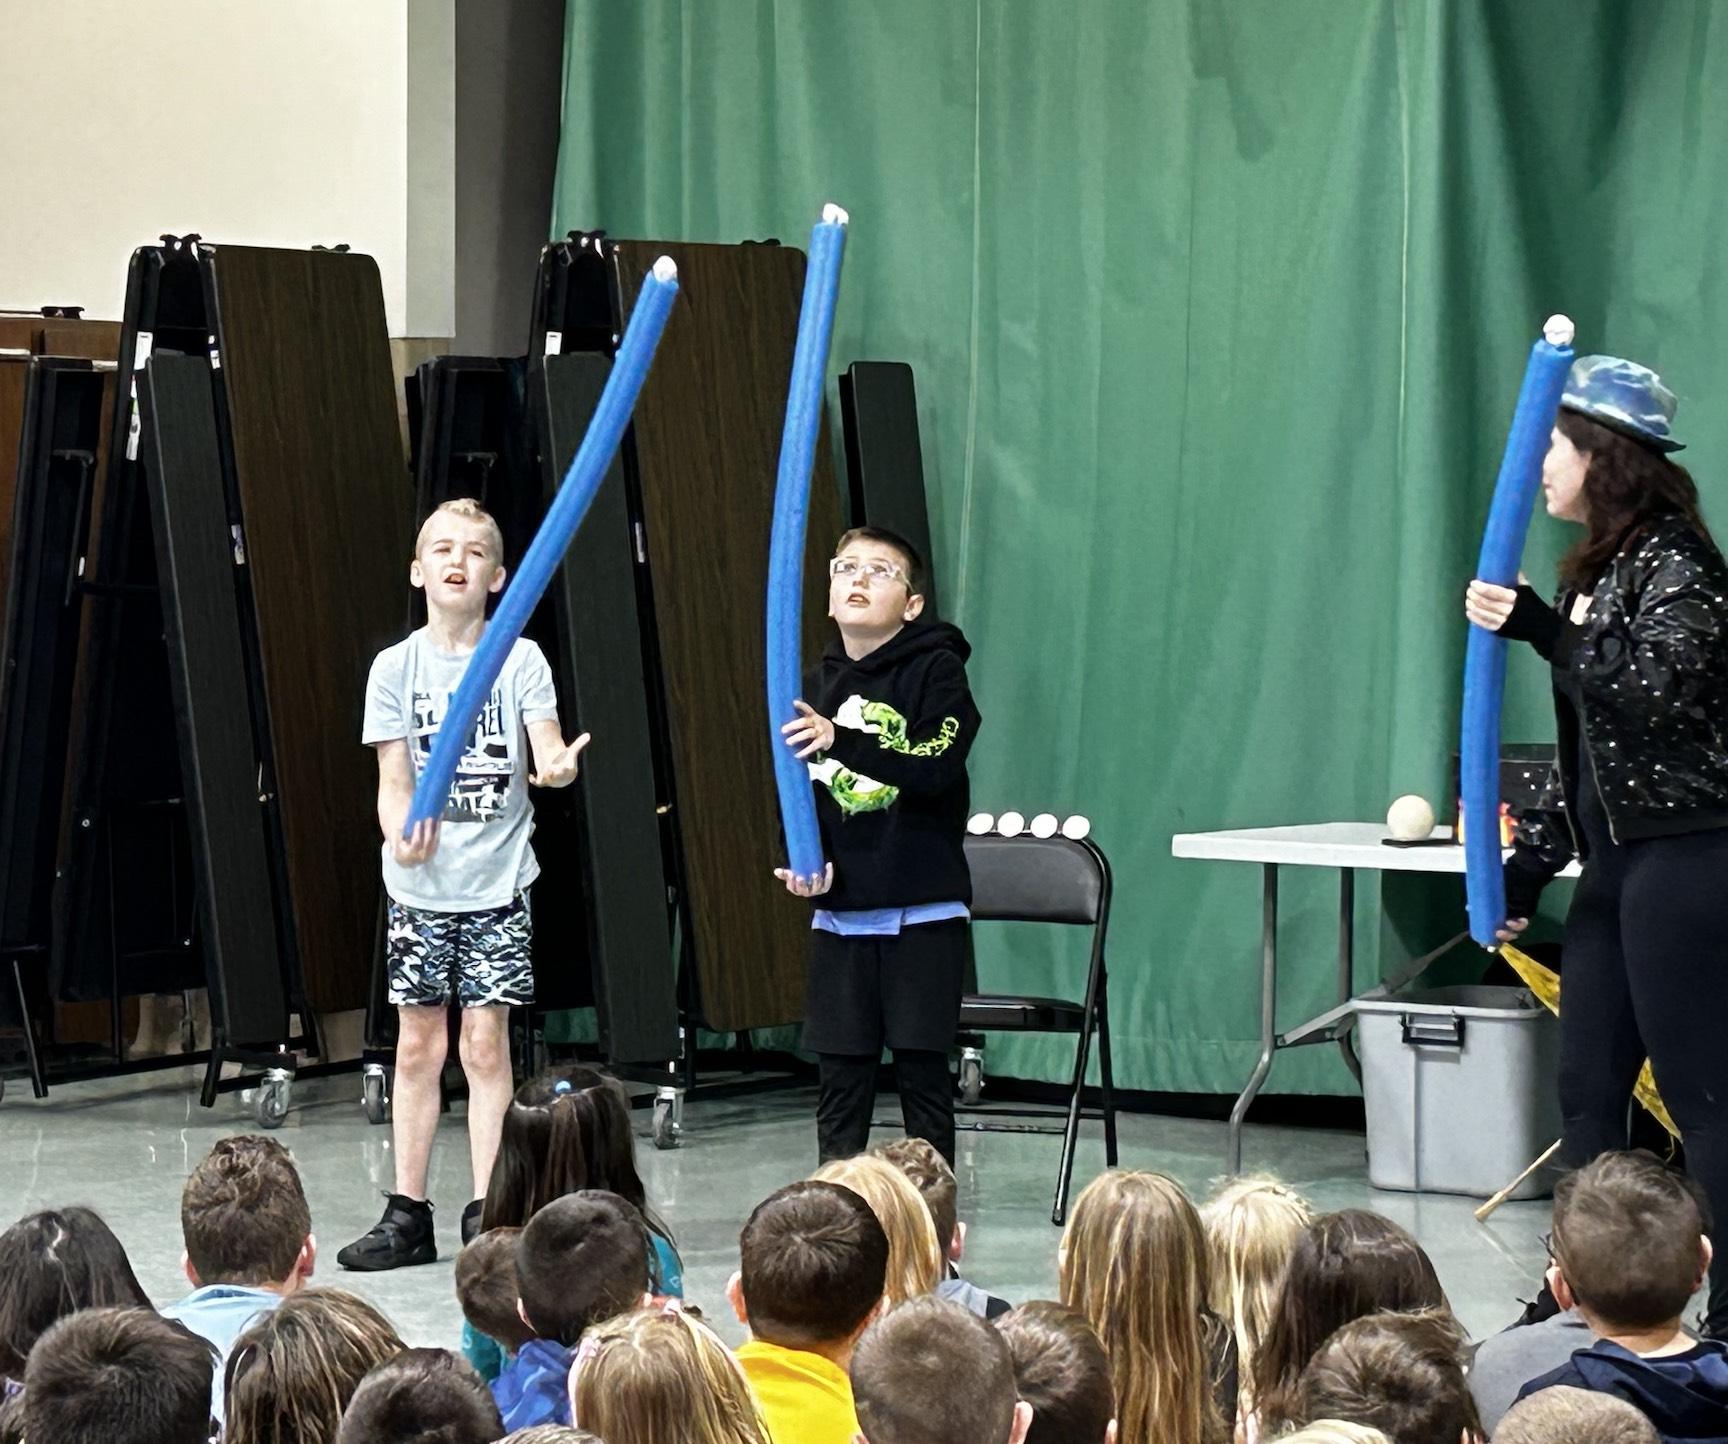 Nico Kramer and Jackson Bost practice balancing their “stars” during the assembly